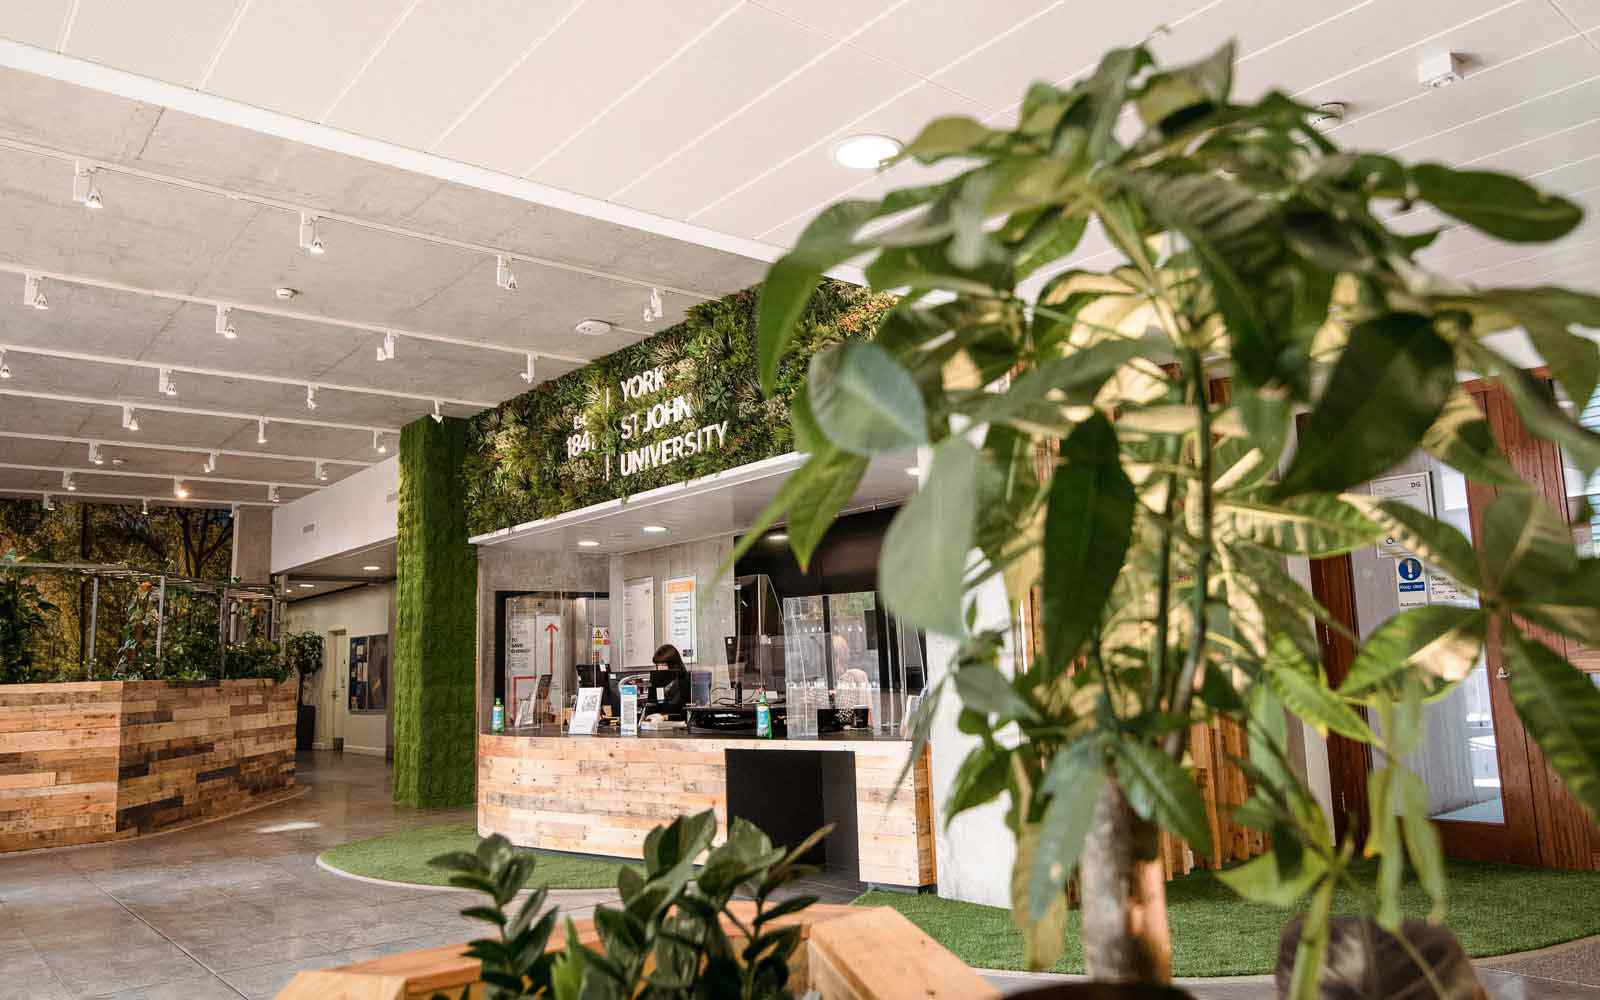 The DeGrey building reception, decorated with greenery and plants 